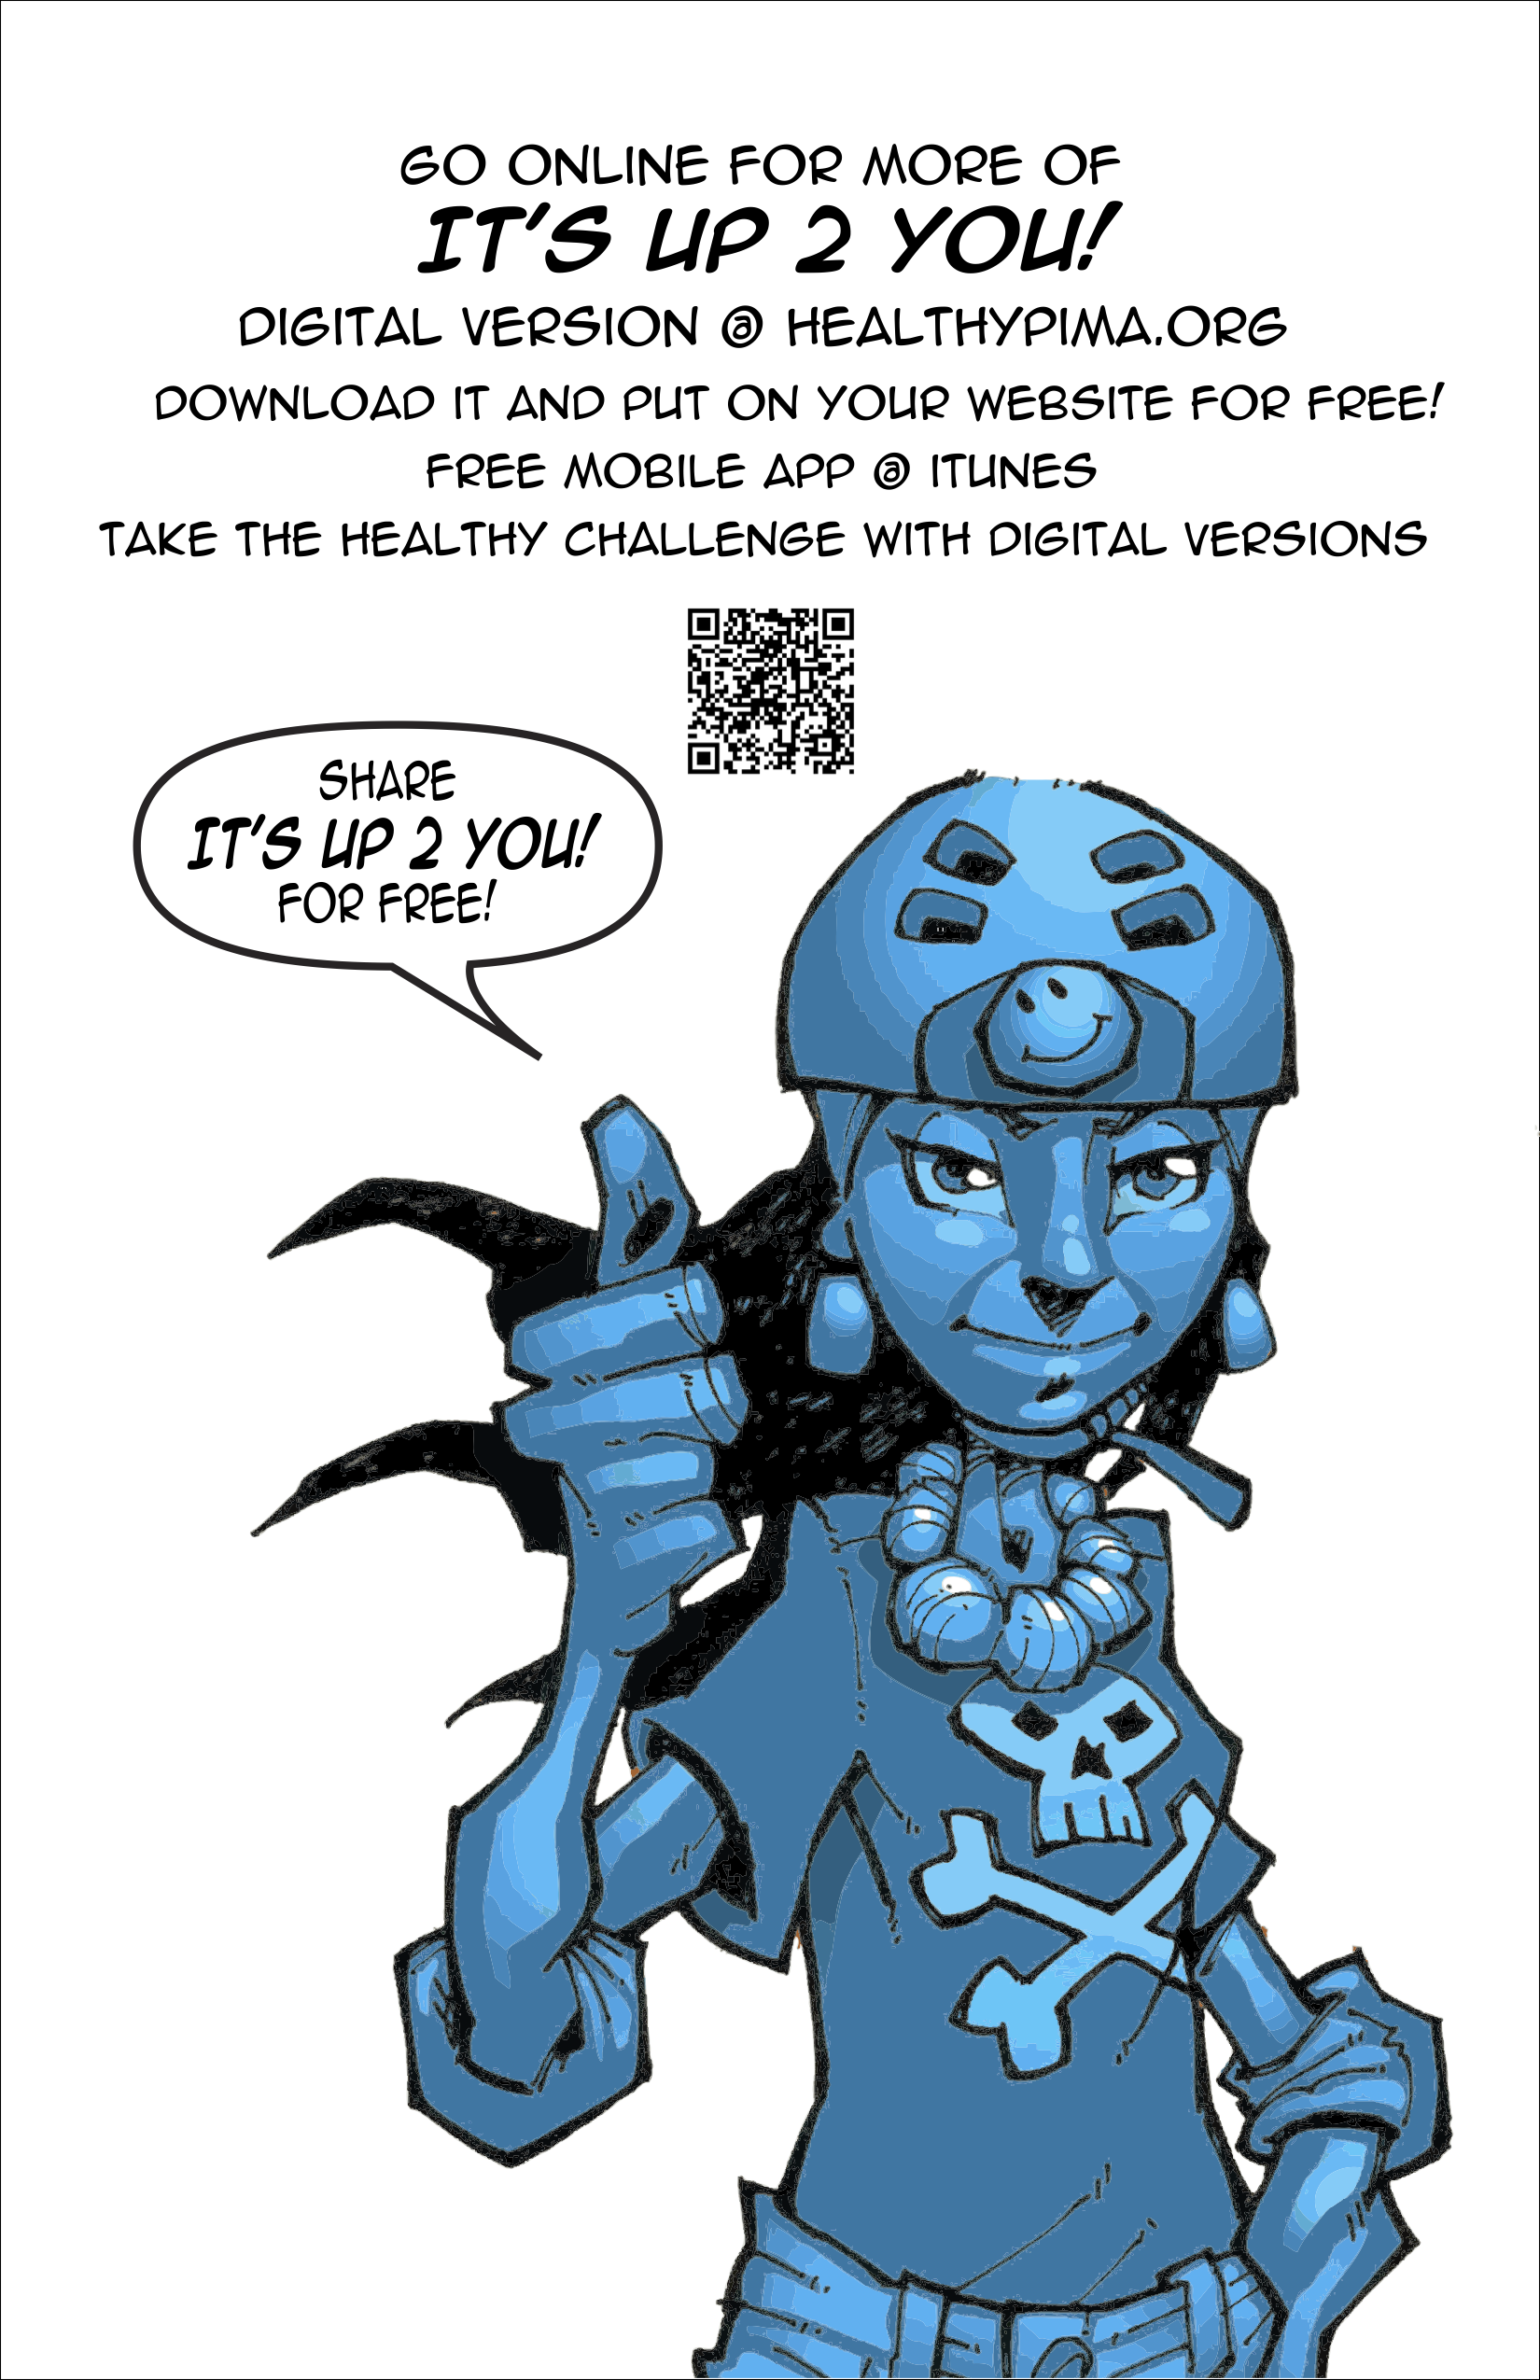 Page 25. This page encourages one and all to download this digital comic book iTunes